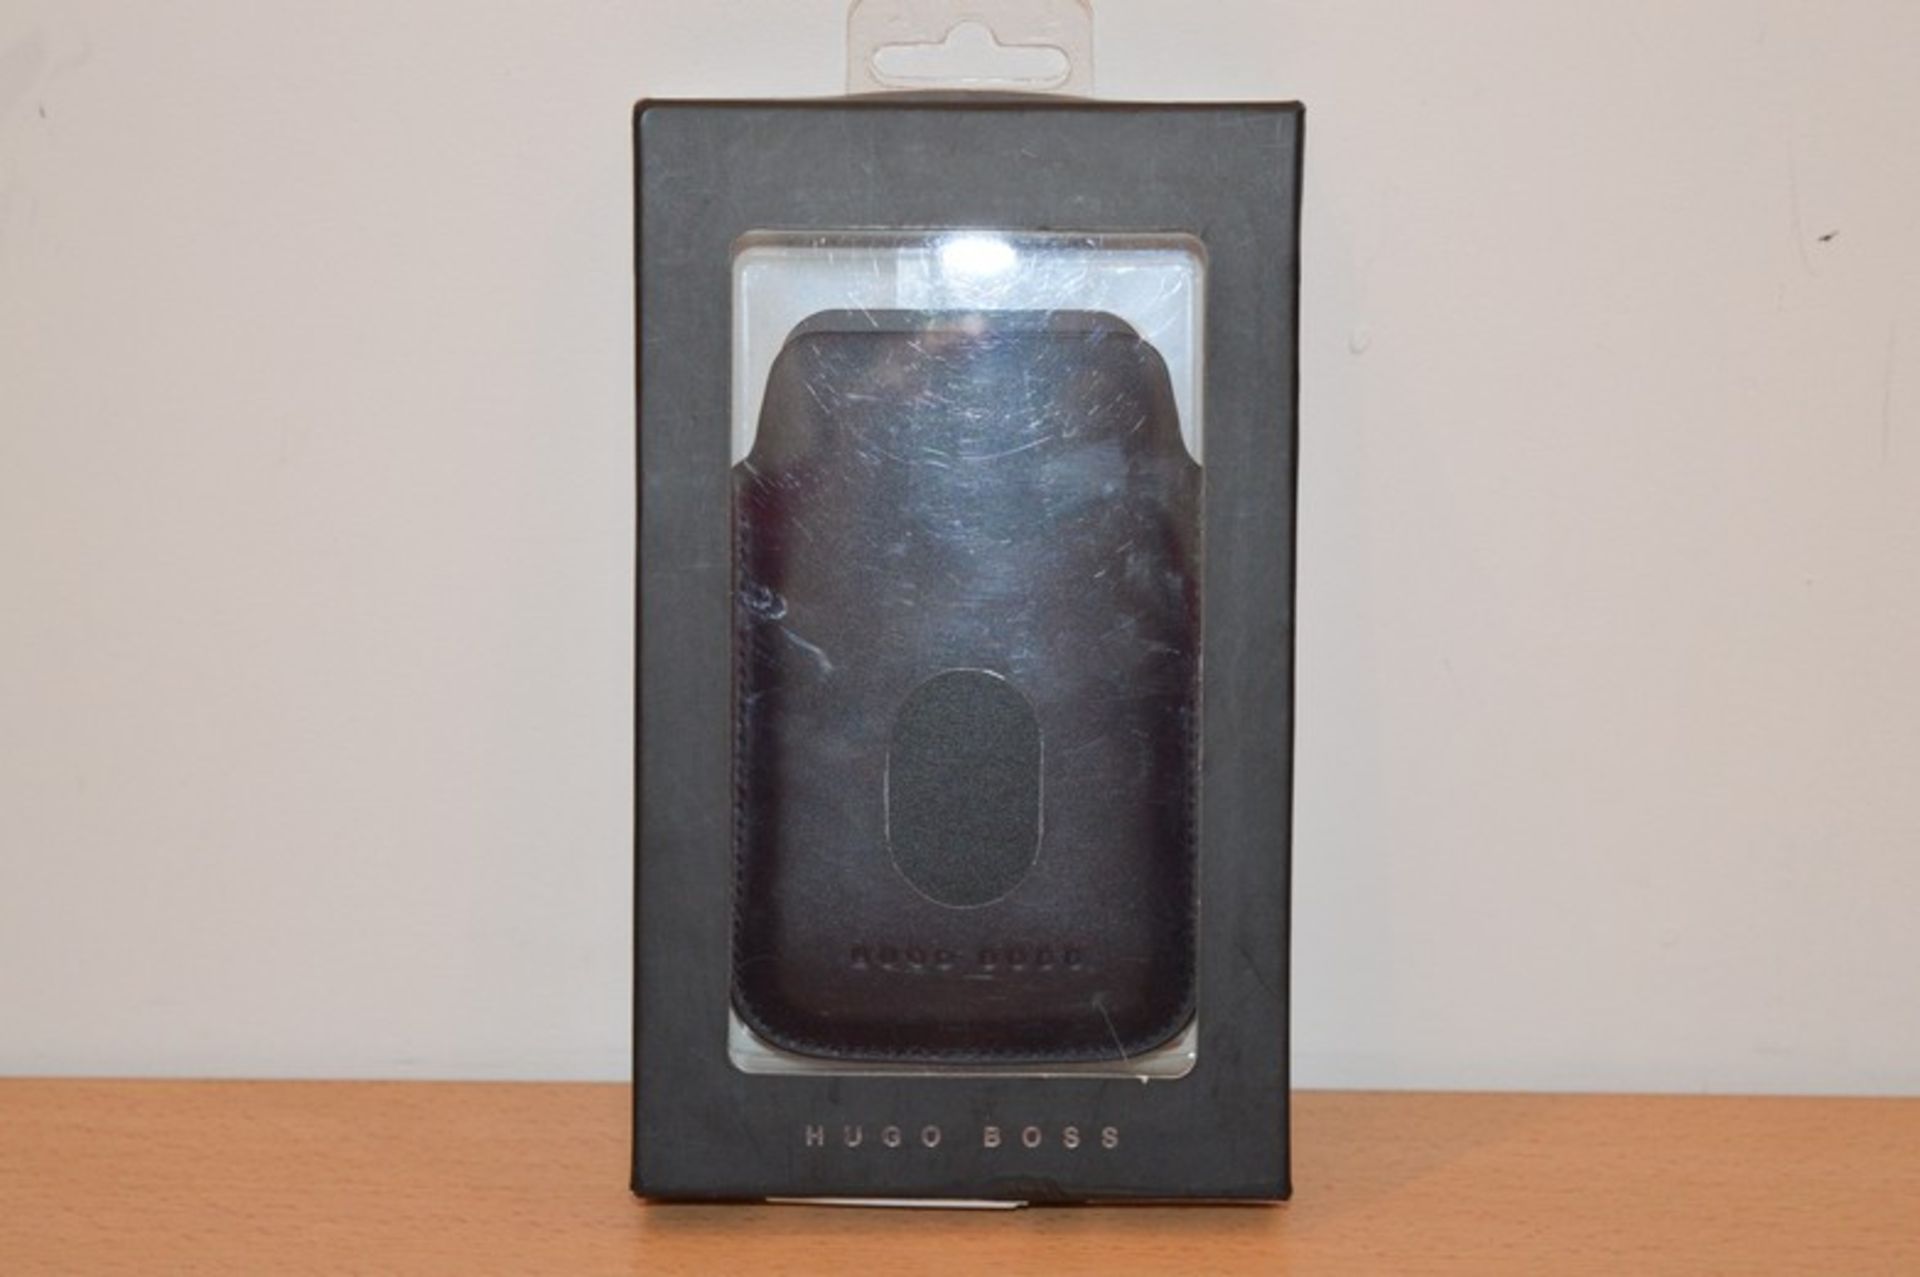 BOXED BRAND NEW HUGO BOSS BLACK LEATHER PHONE PROTECTIVE CASE (PC-564546)